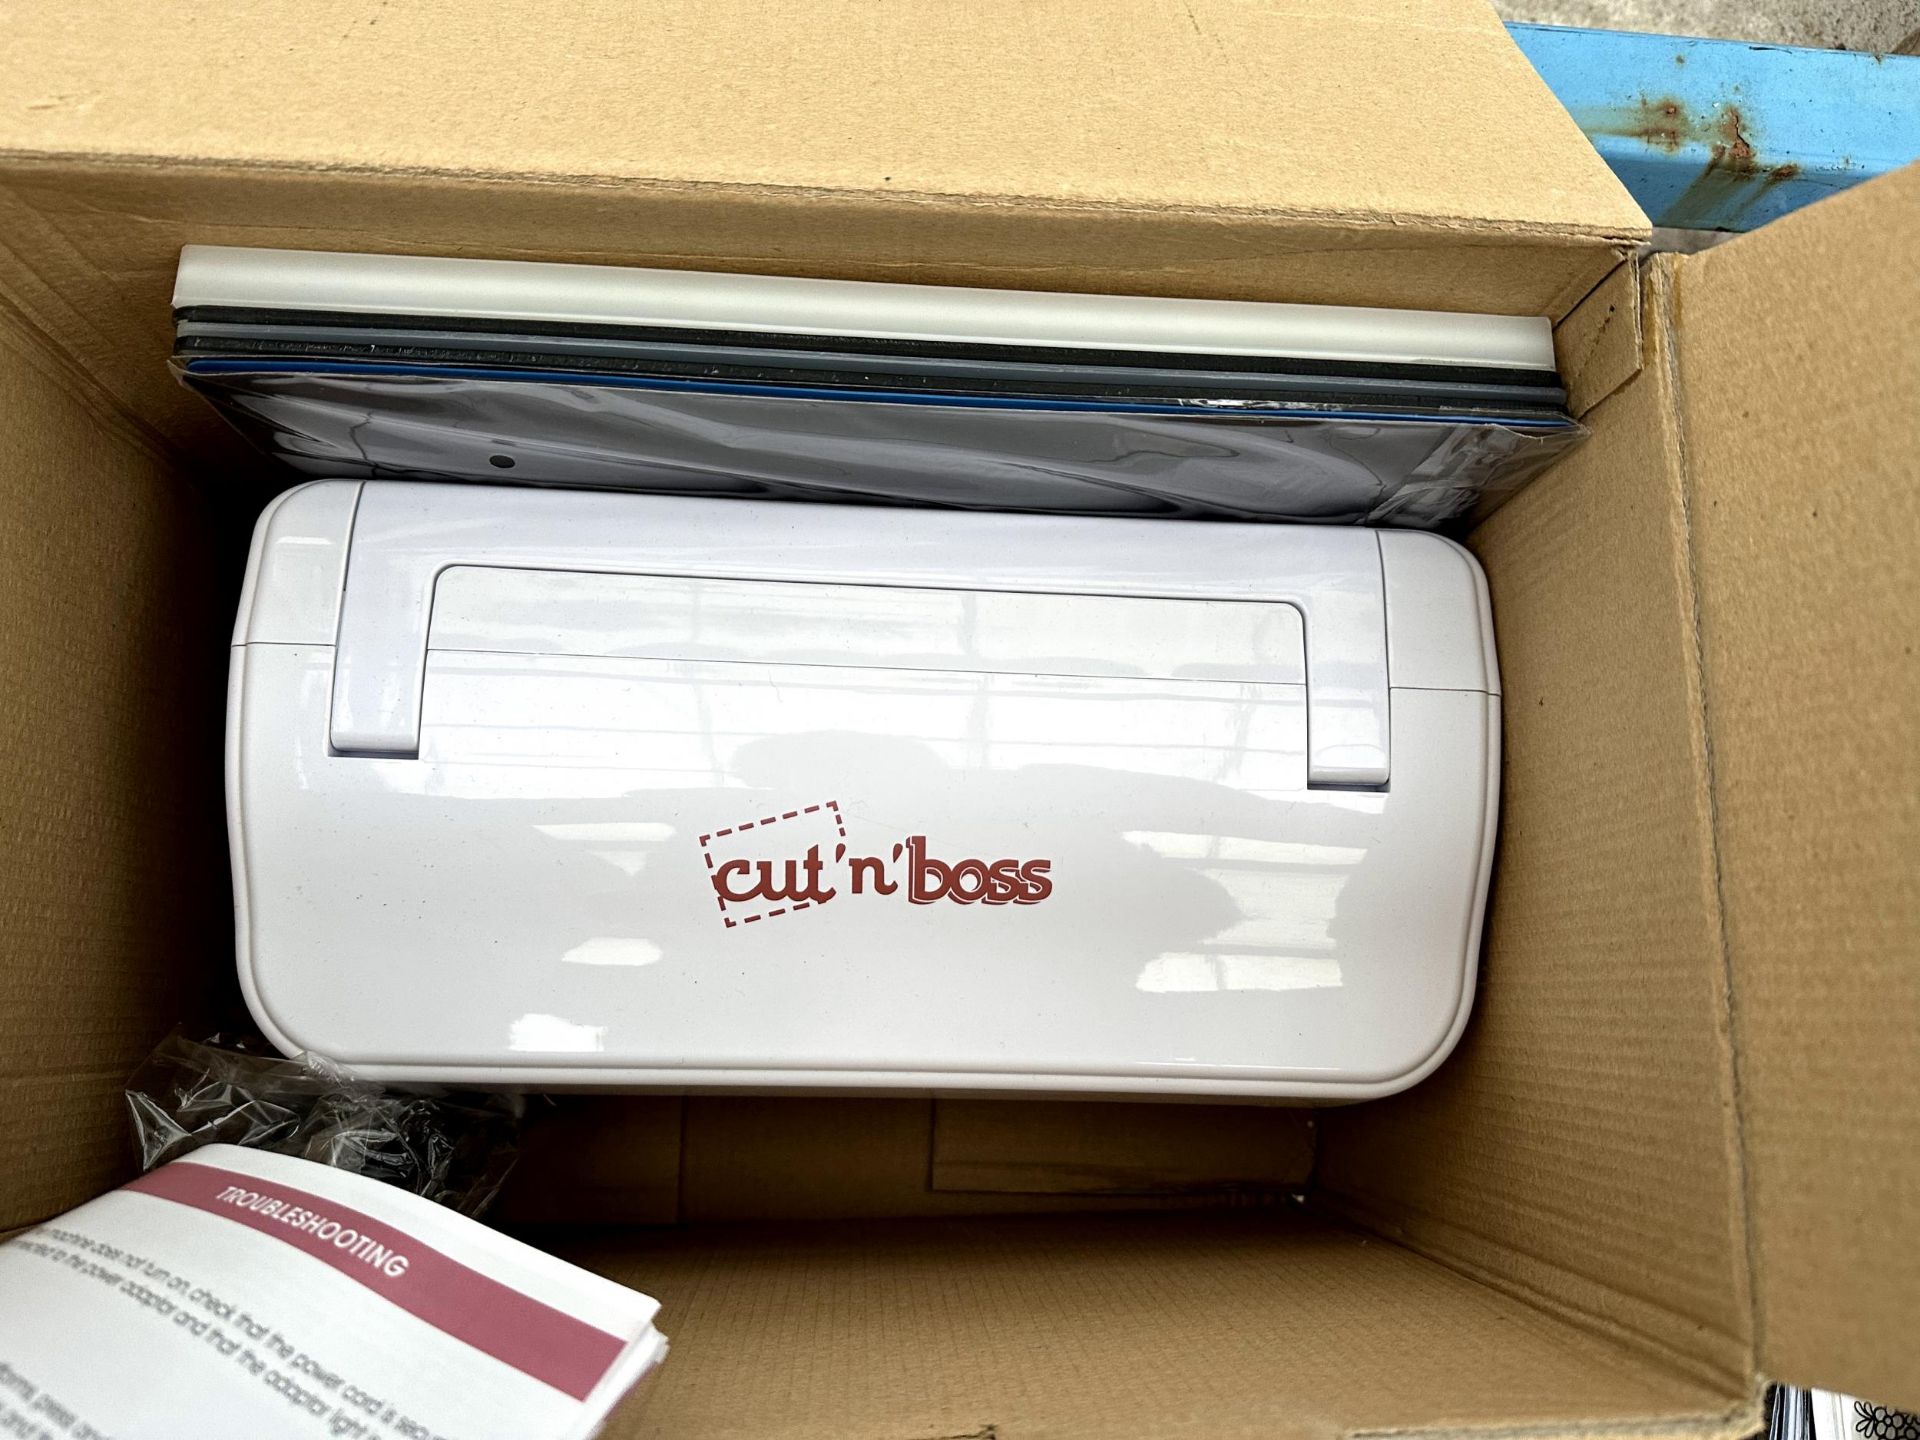 A CUT'N'BOSS ALL IN ONE EMBOSSER AND DIE CUTTER - Image 3 of 3